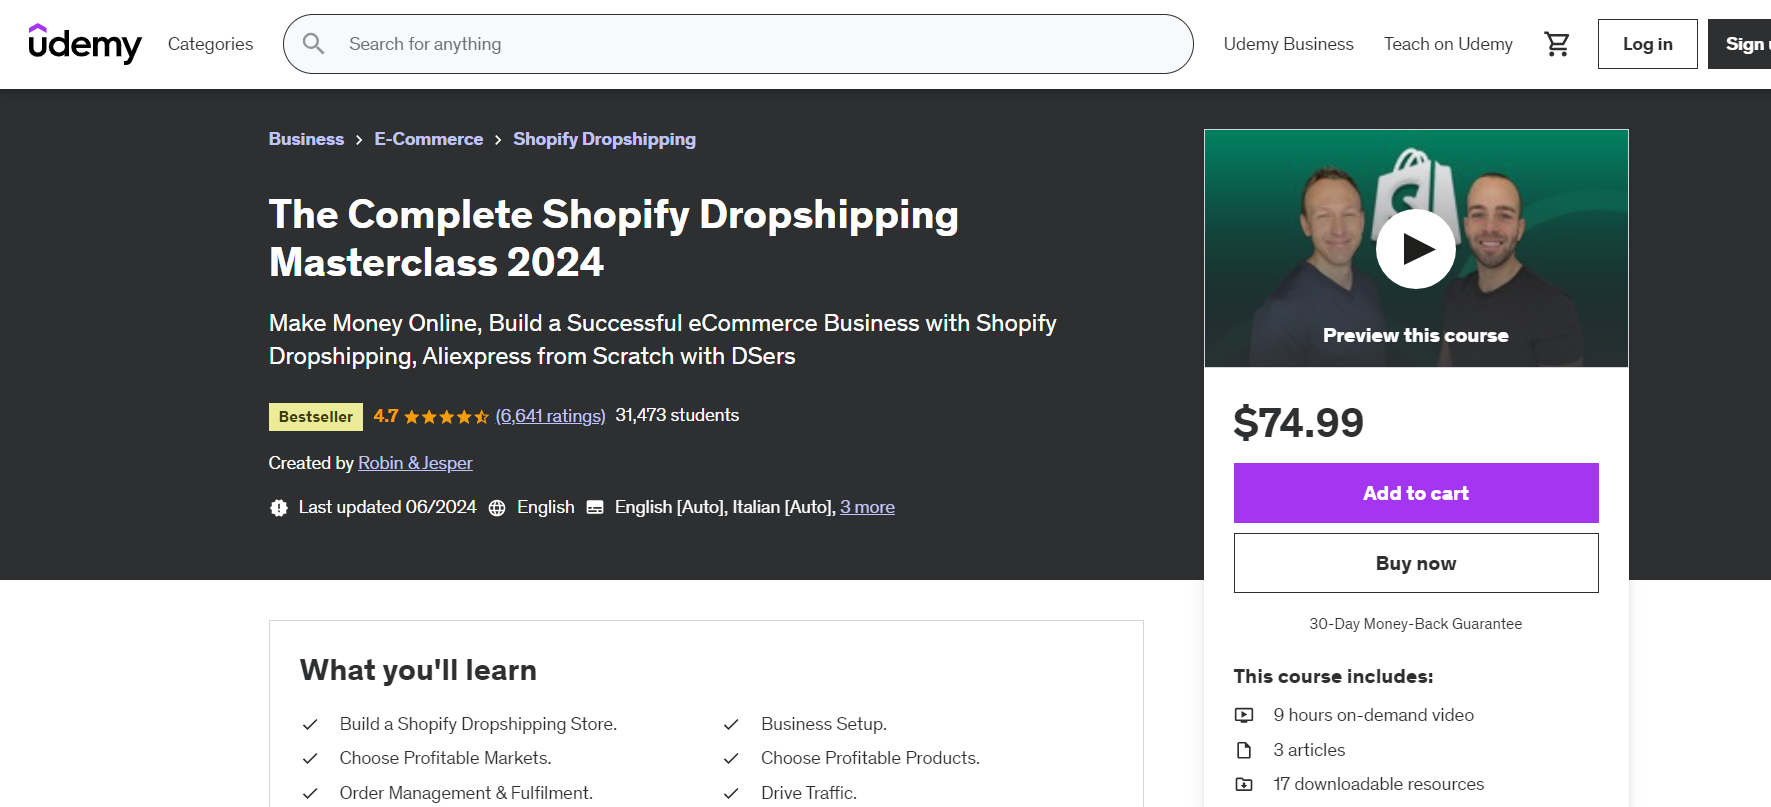 The Complete Shopify Dropshipping Masterclass 2024 on Udemy.  It’s a highly-rated course.   This course is a practical and hands-on guide designed to help you set up a Shopify dropshipping business from scratch. 